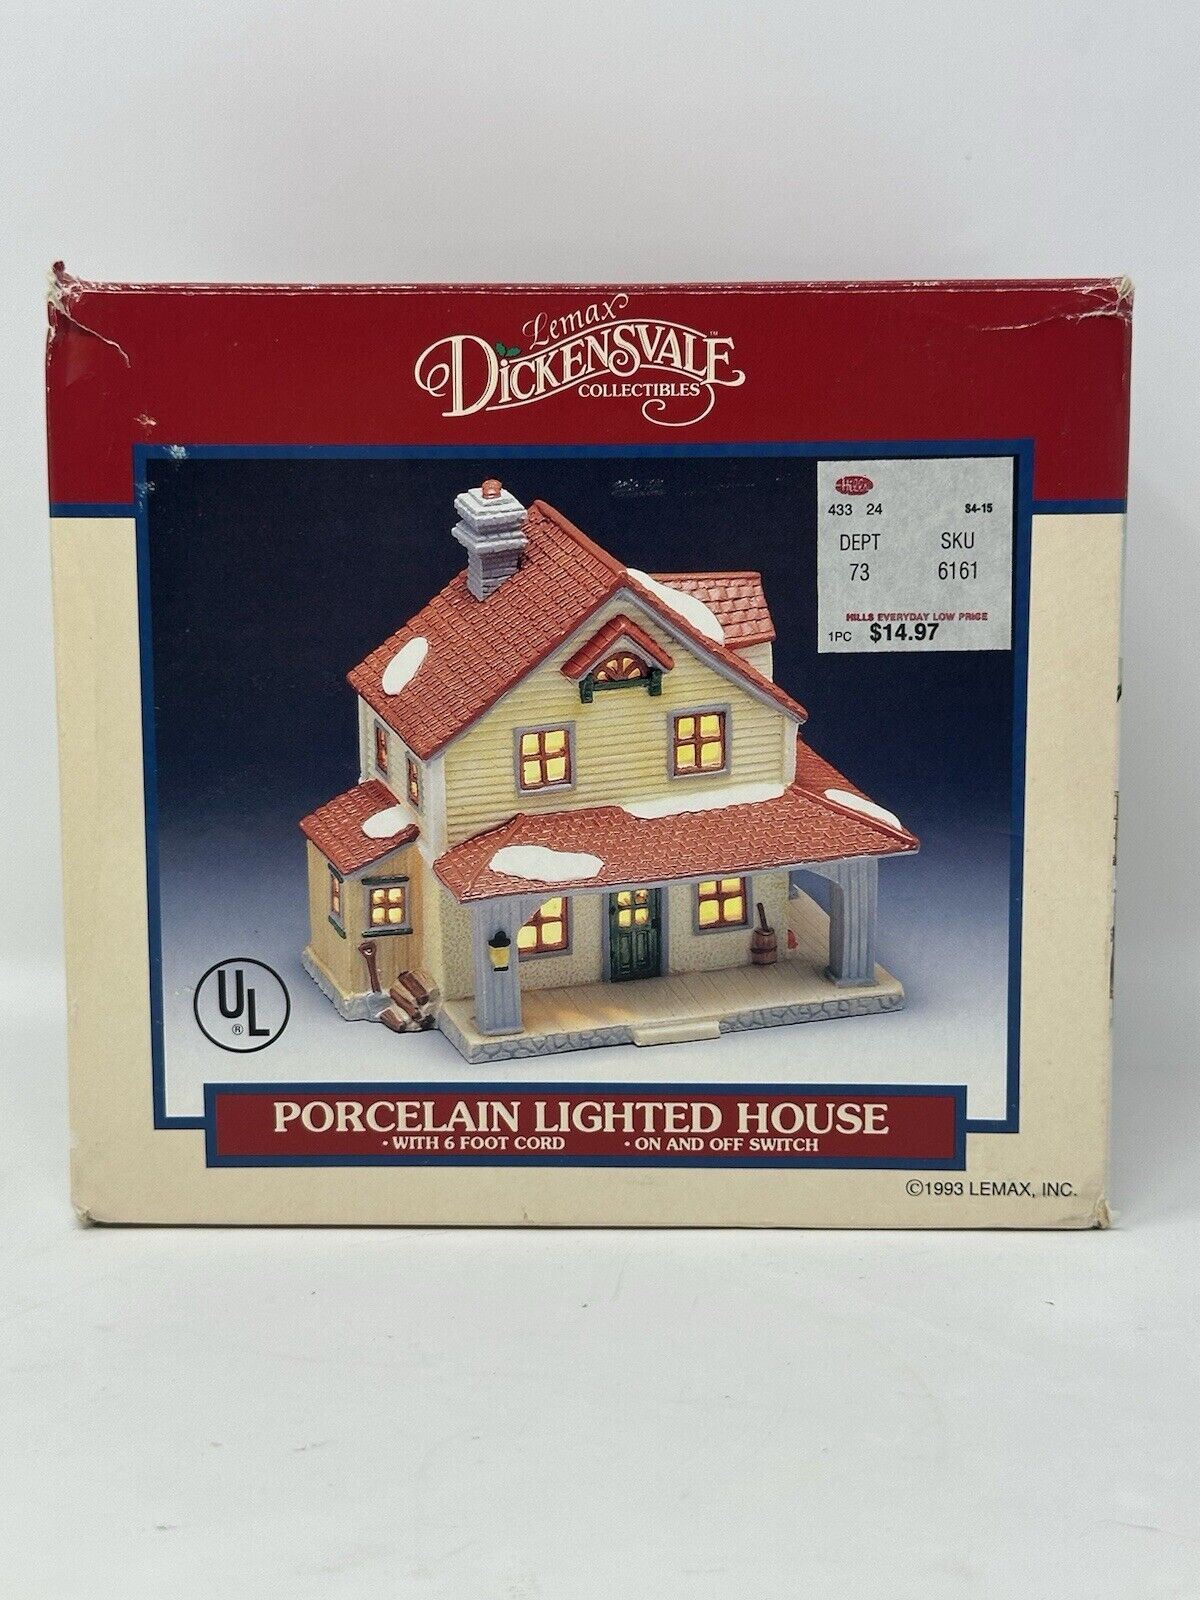 Lemax Dickensvale Vintage Porcelain Lighted Forest House 1993 with Box